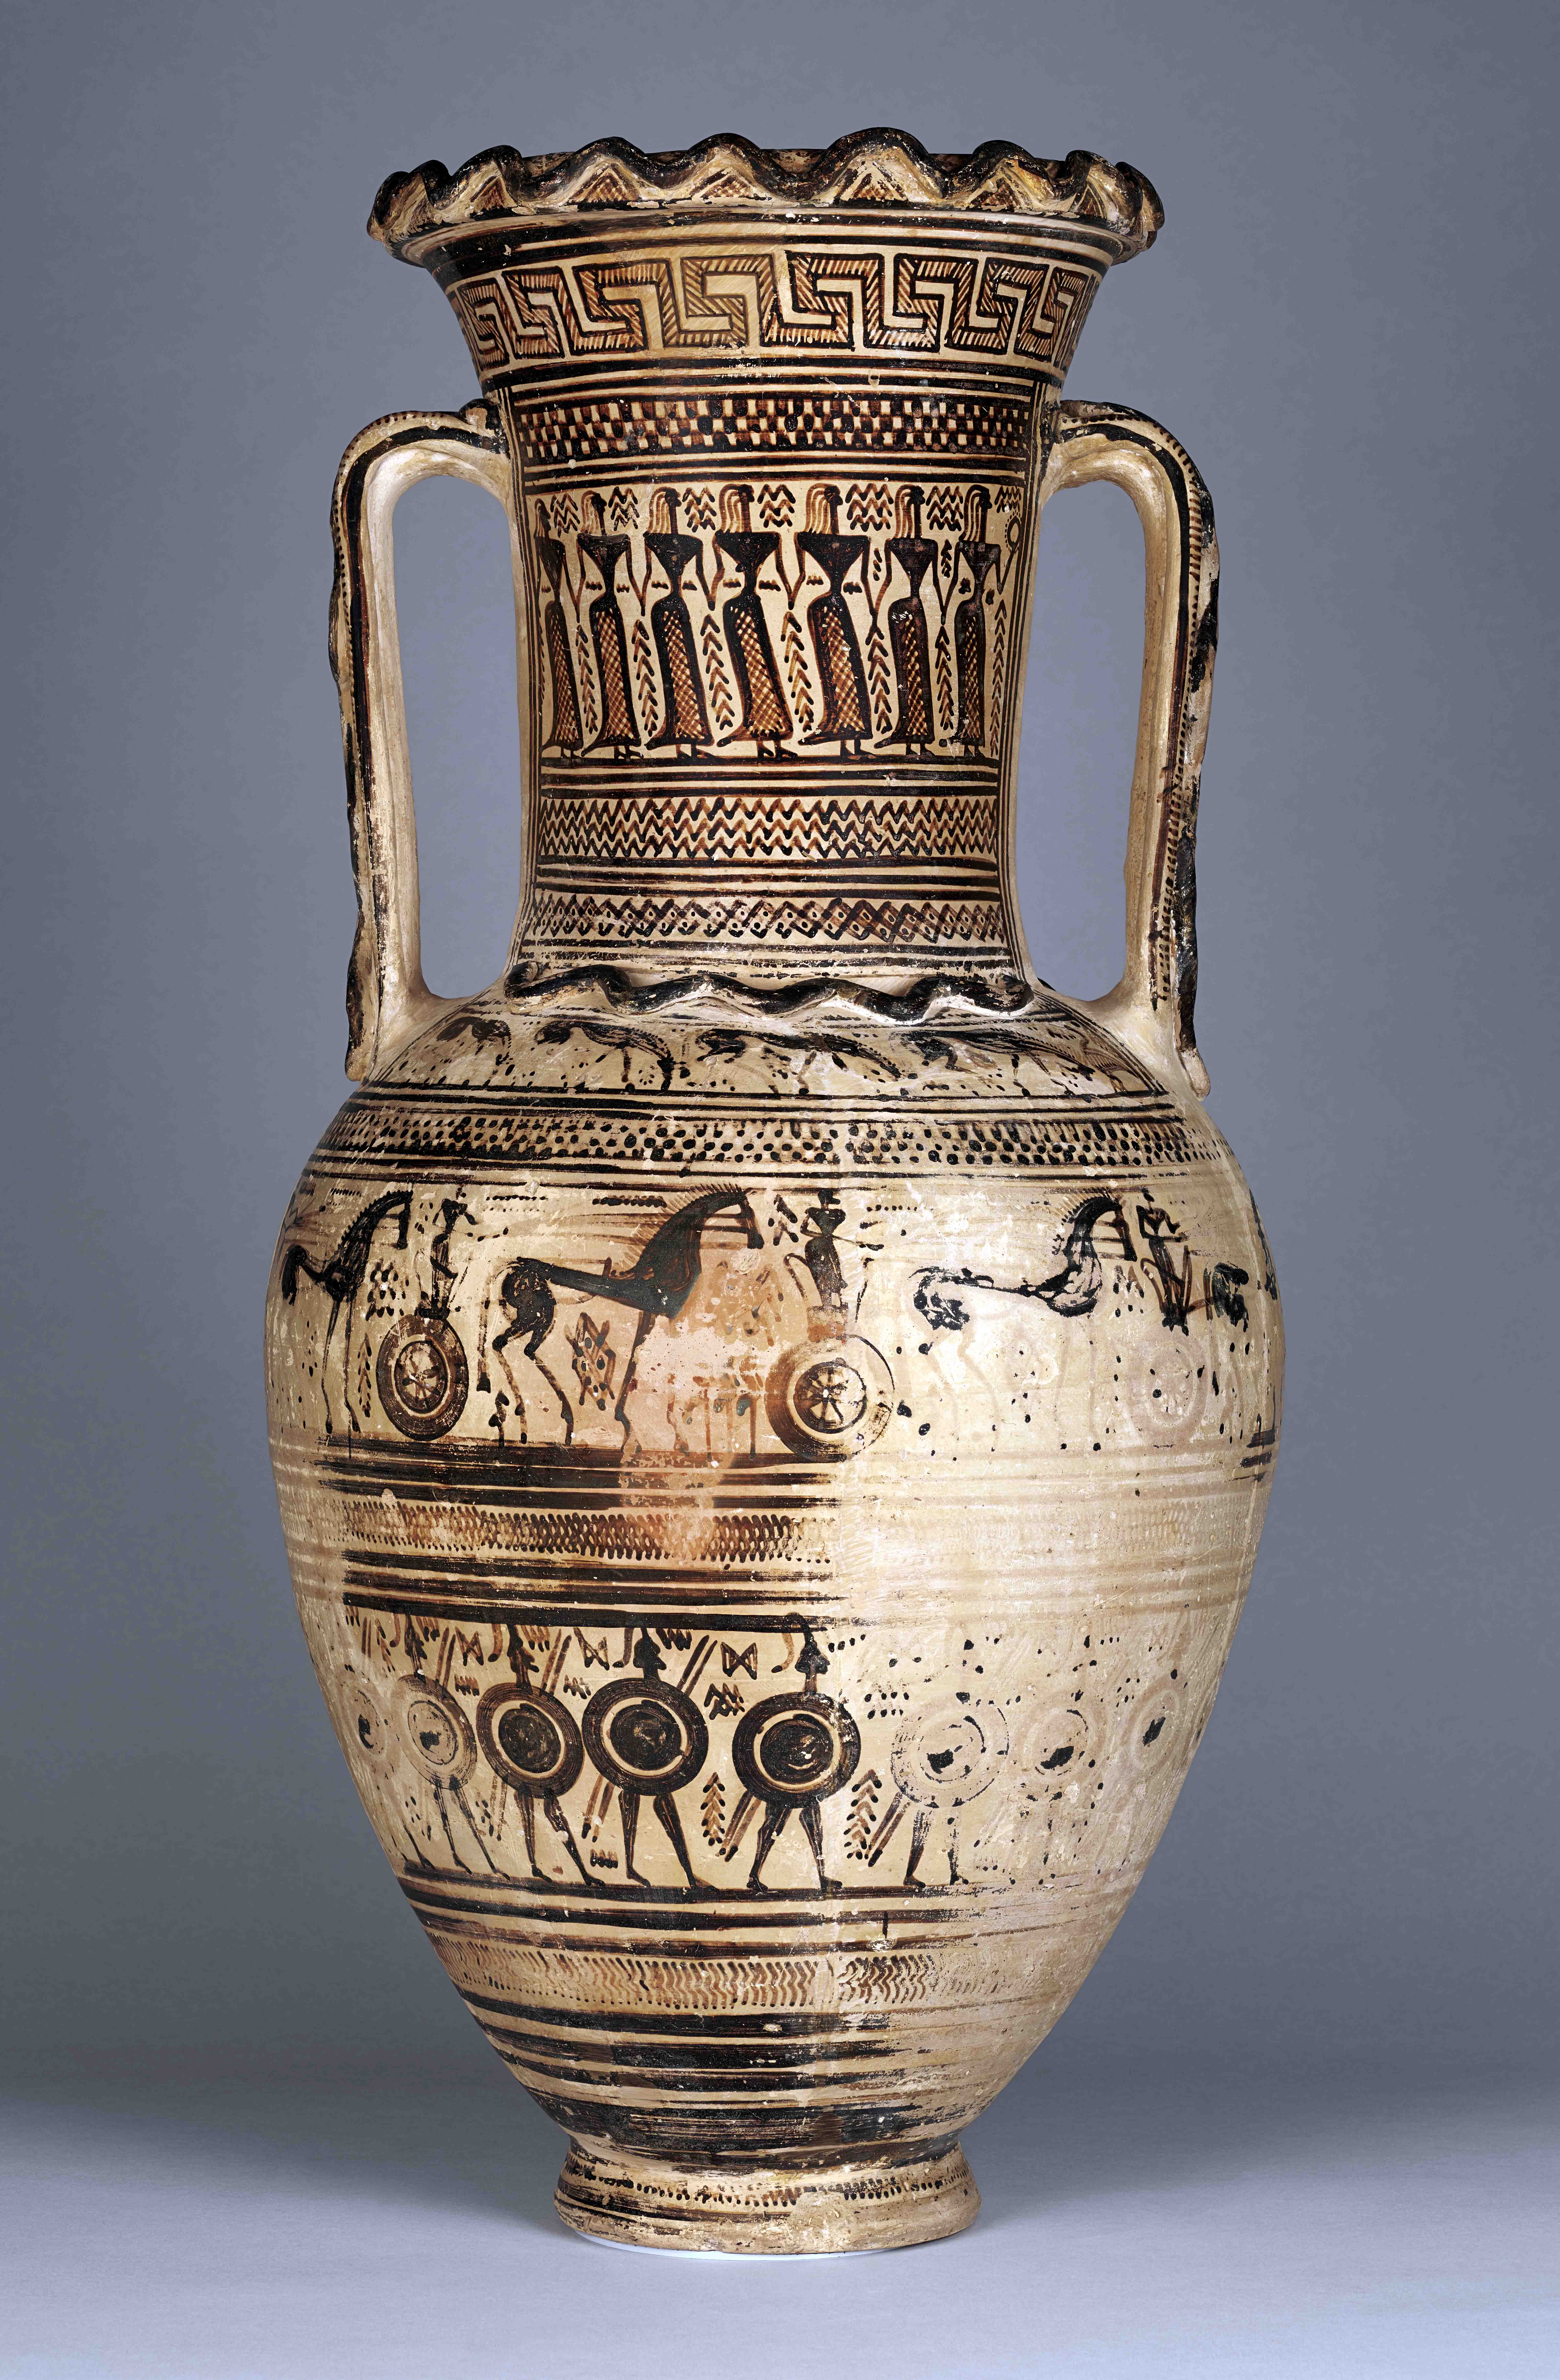 On the neck of this vase, dancing women follow a woman holding a wreath, while processions of men in chariots and armed soldiers decorate the body below. Funerary Amphora with Scenes of Mourning, 720–700 B.C., Greek, made in Athens. Terracotta, 27 5/8 x 12 in. The J. Paul Getty Museum, 2016.35. Purchased in part with funds provided by the Villa Council. Digital image courtesy of the Getty’s Open Content Program